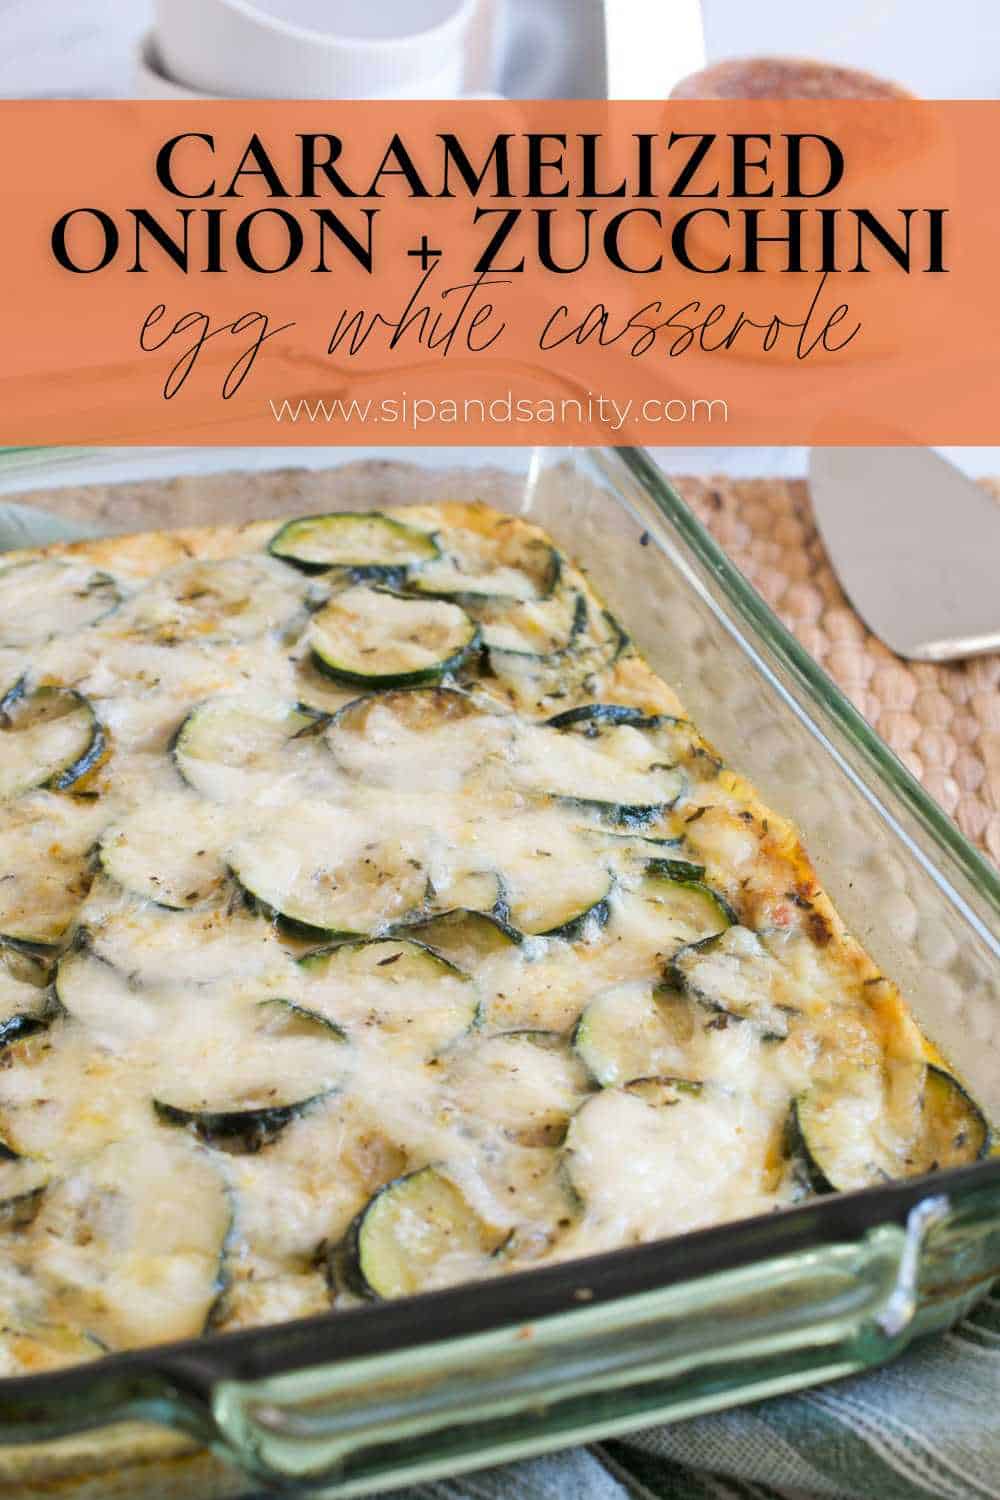 Pin image for caramelized onion and zucchini egg white casserole.